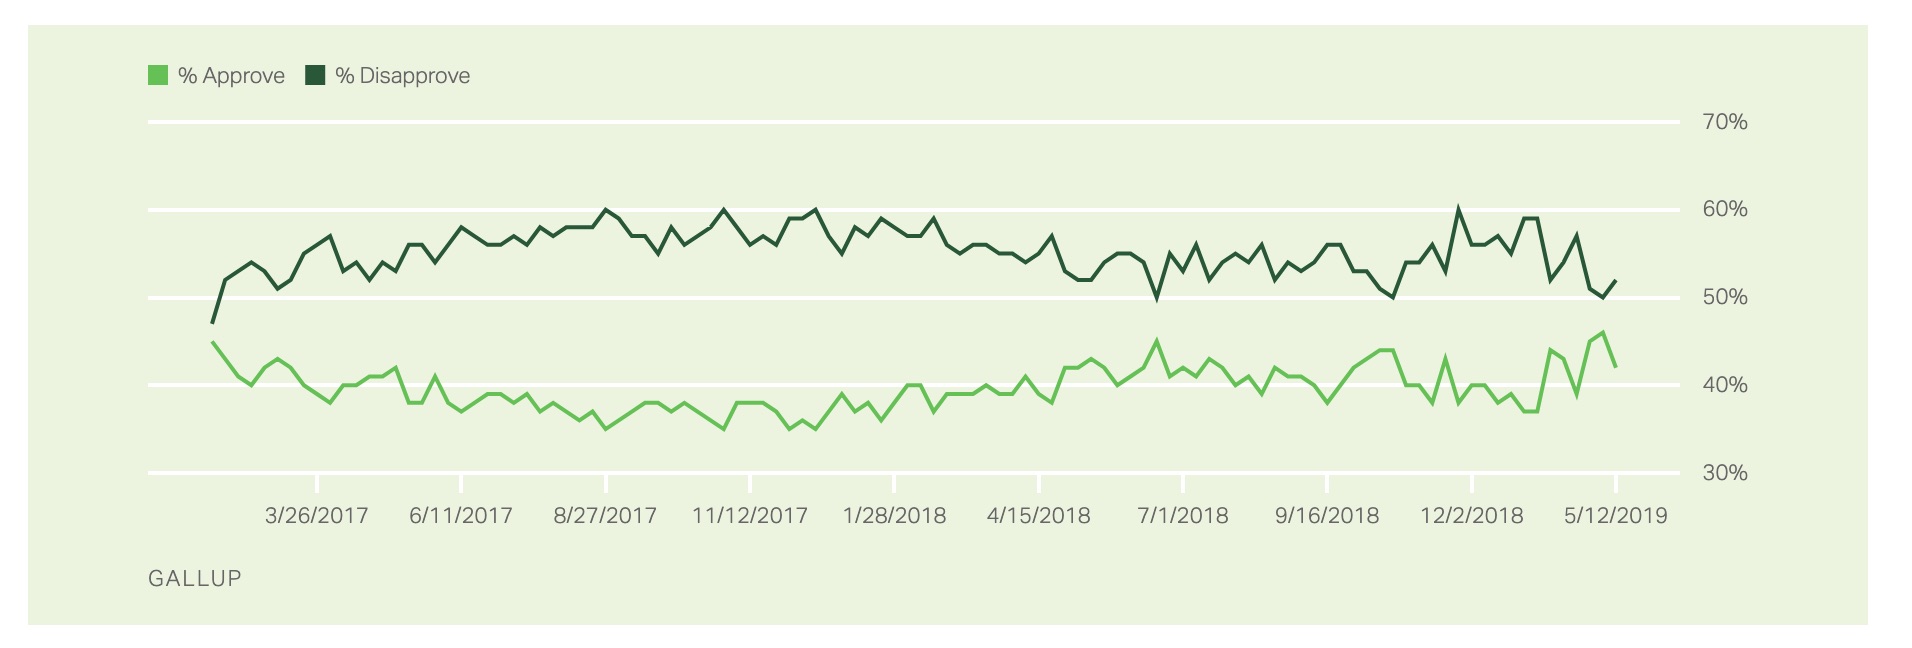 Trump's Gallup numbers